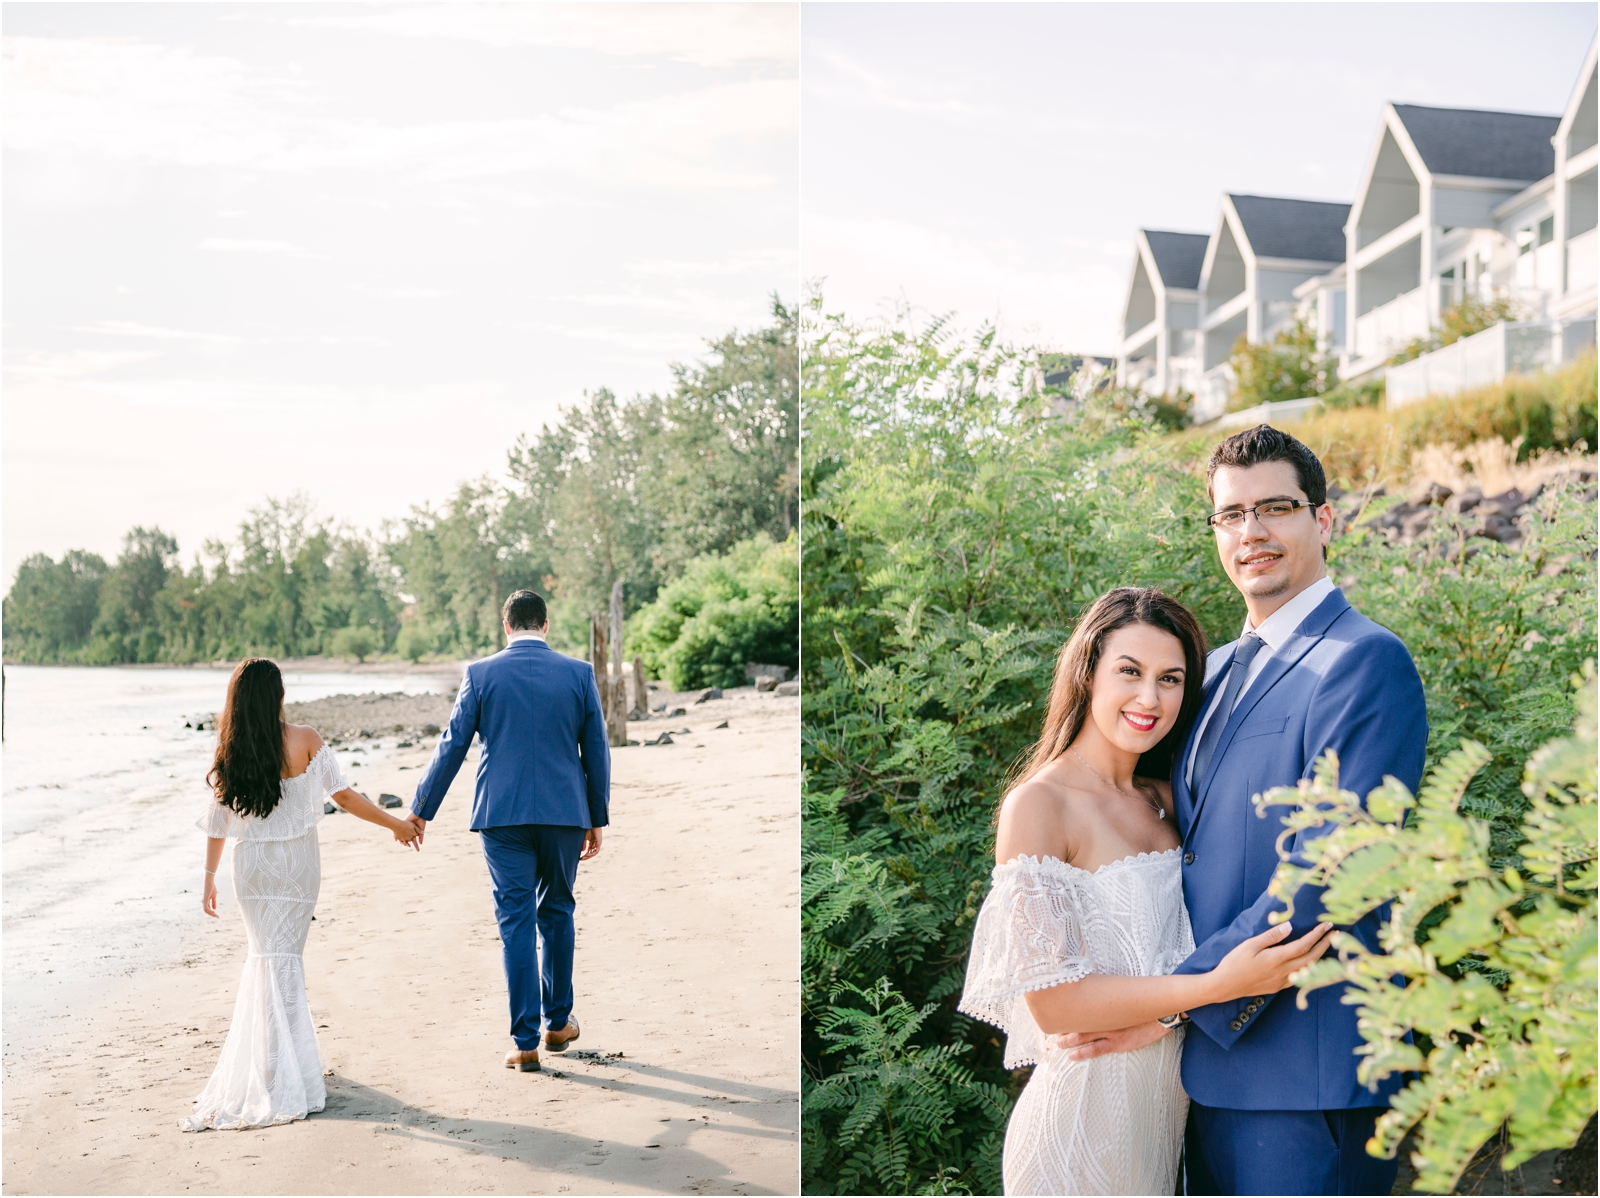 Couple with arm around each other in dressy outfits for their engagement photos in Portland.